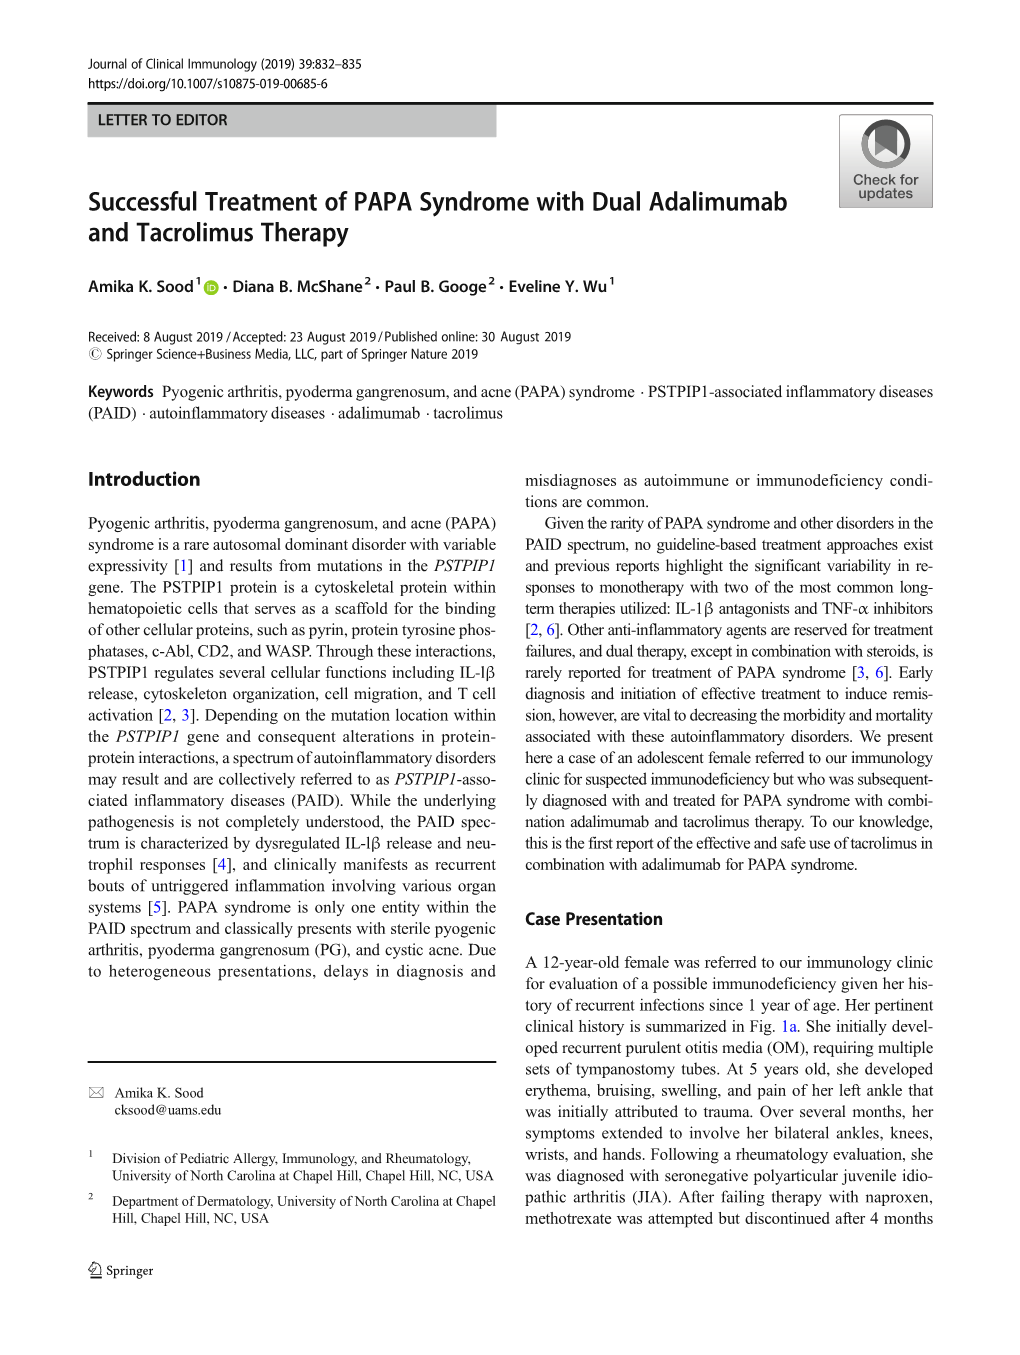 Successful Treatment of PAPA Syndrome with Dual Adalimumab and Tacrolimus Therapy